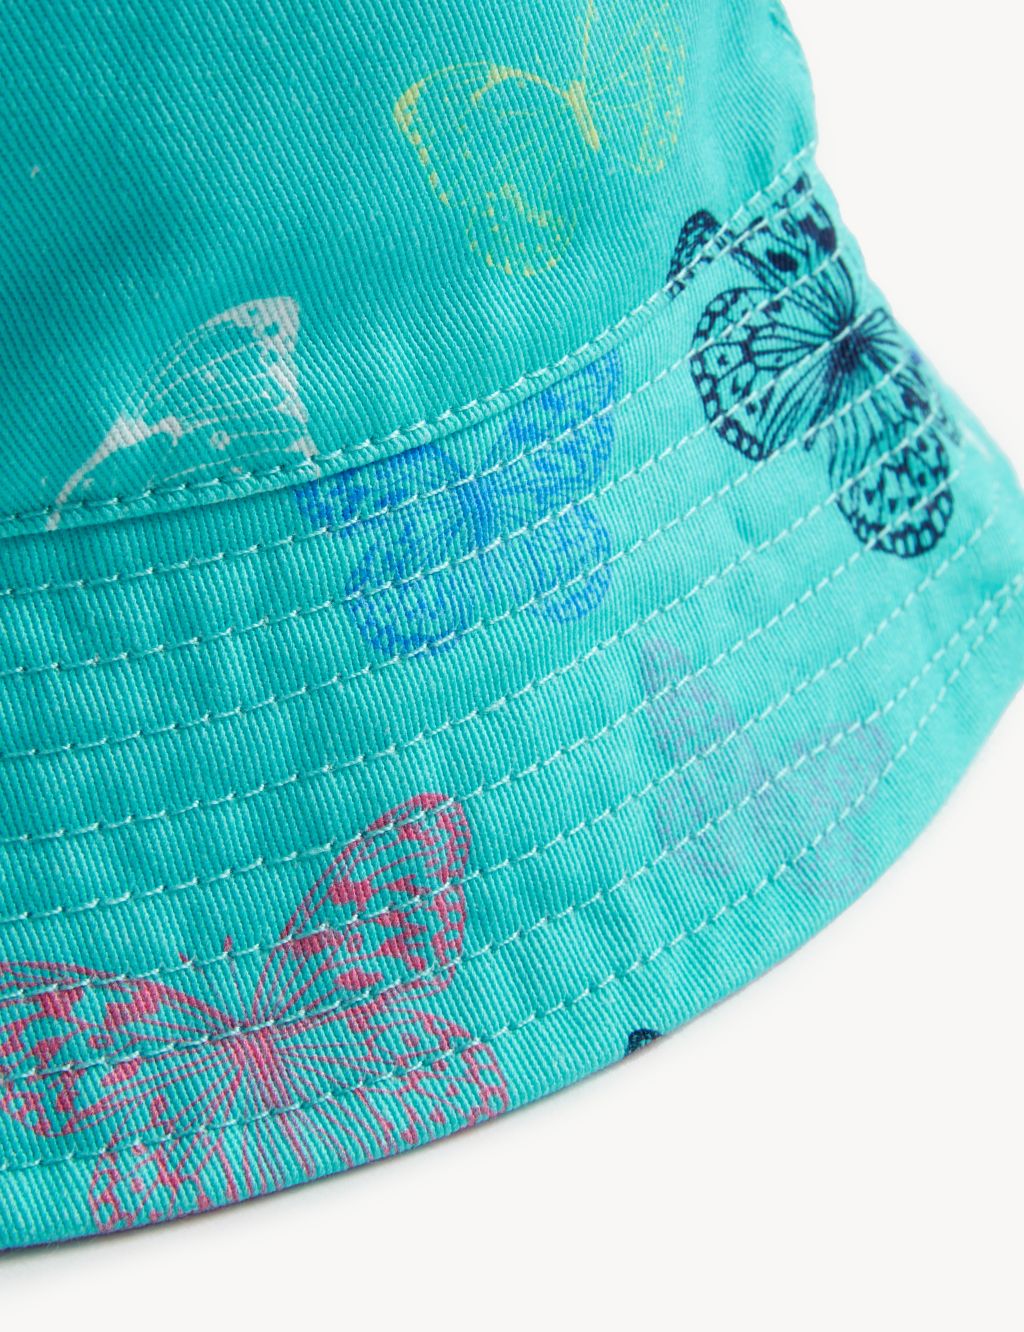 Kids' Pure Cotton Butterfly Sun Hat (1-13 Yrs) image 3